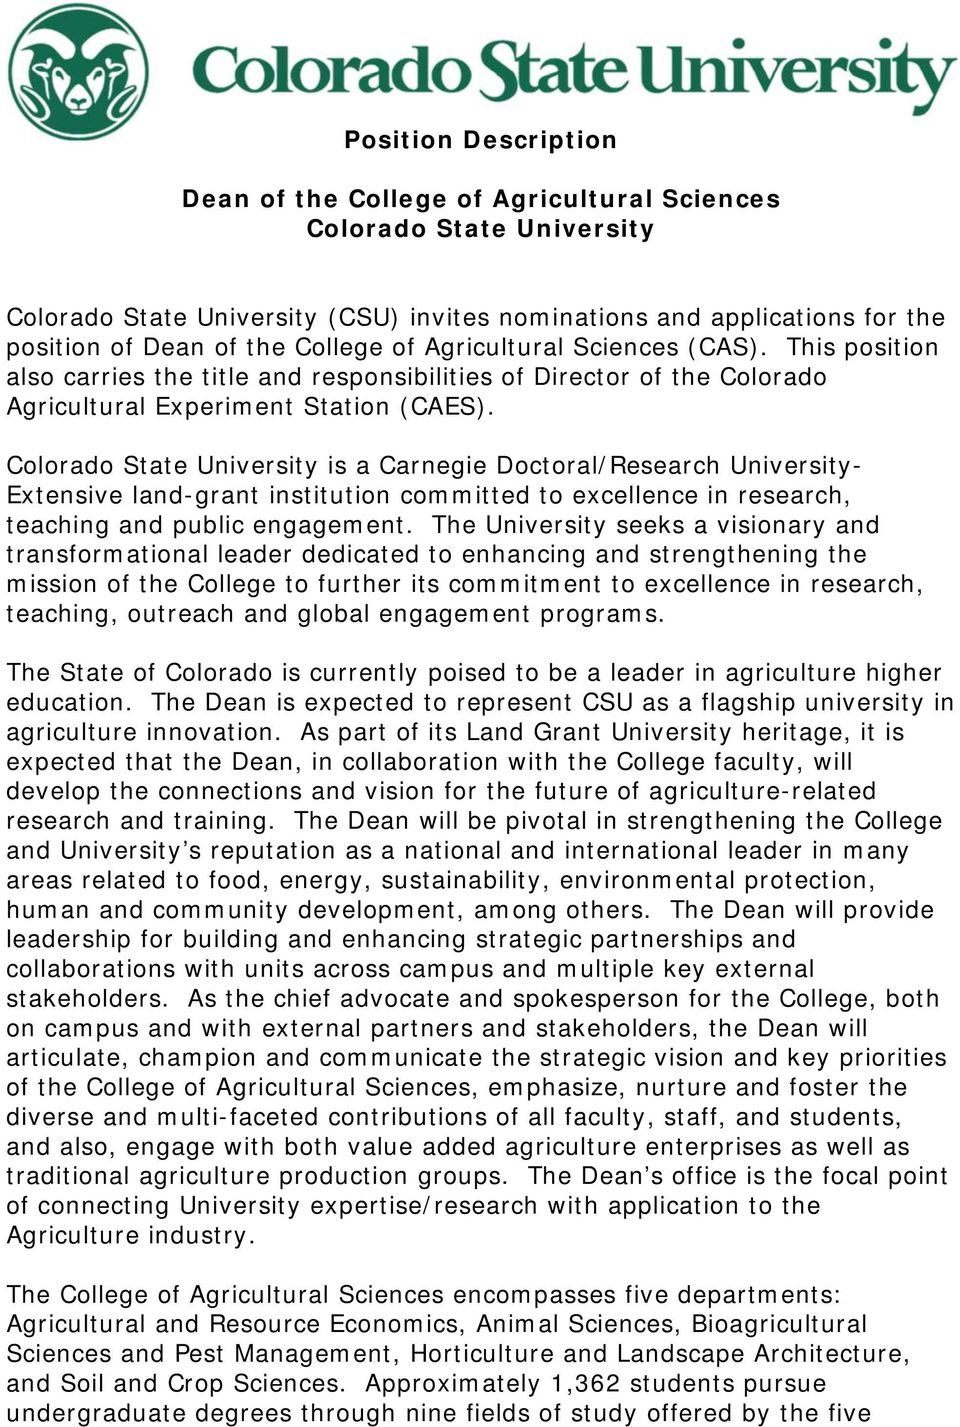 Colorado State University is a Carnegie Doctoral/Research University- Extensive land-grant institution committed to excellence in research, teaching and public engagement.